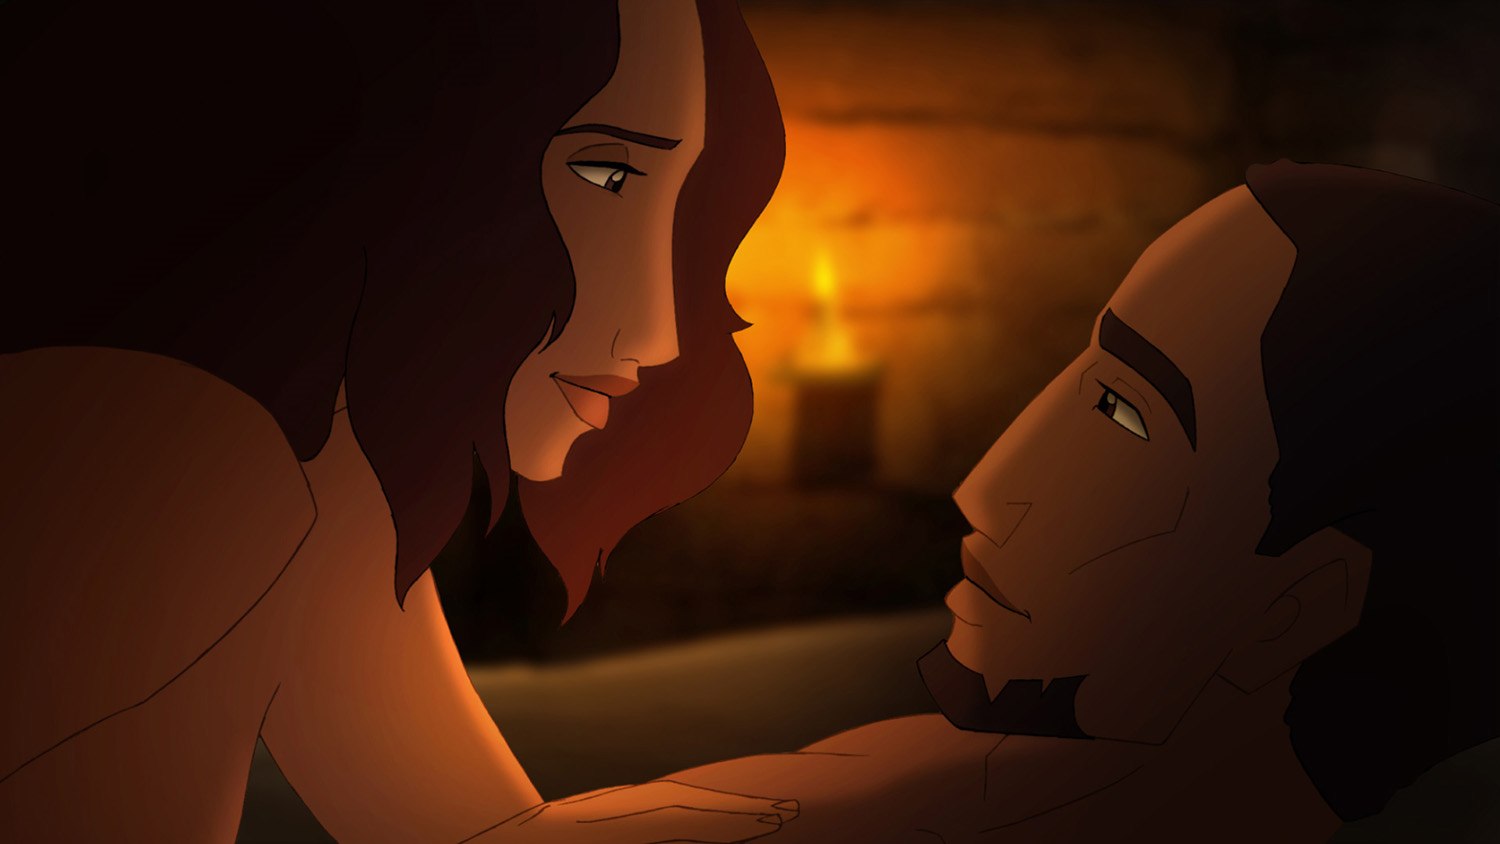 Animated movies with sex scenes